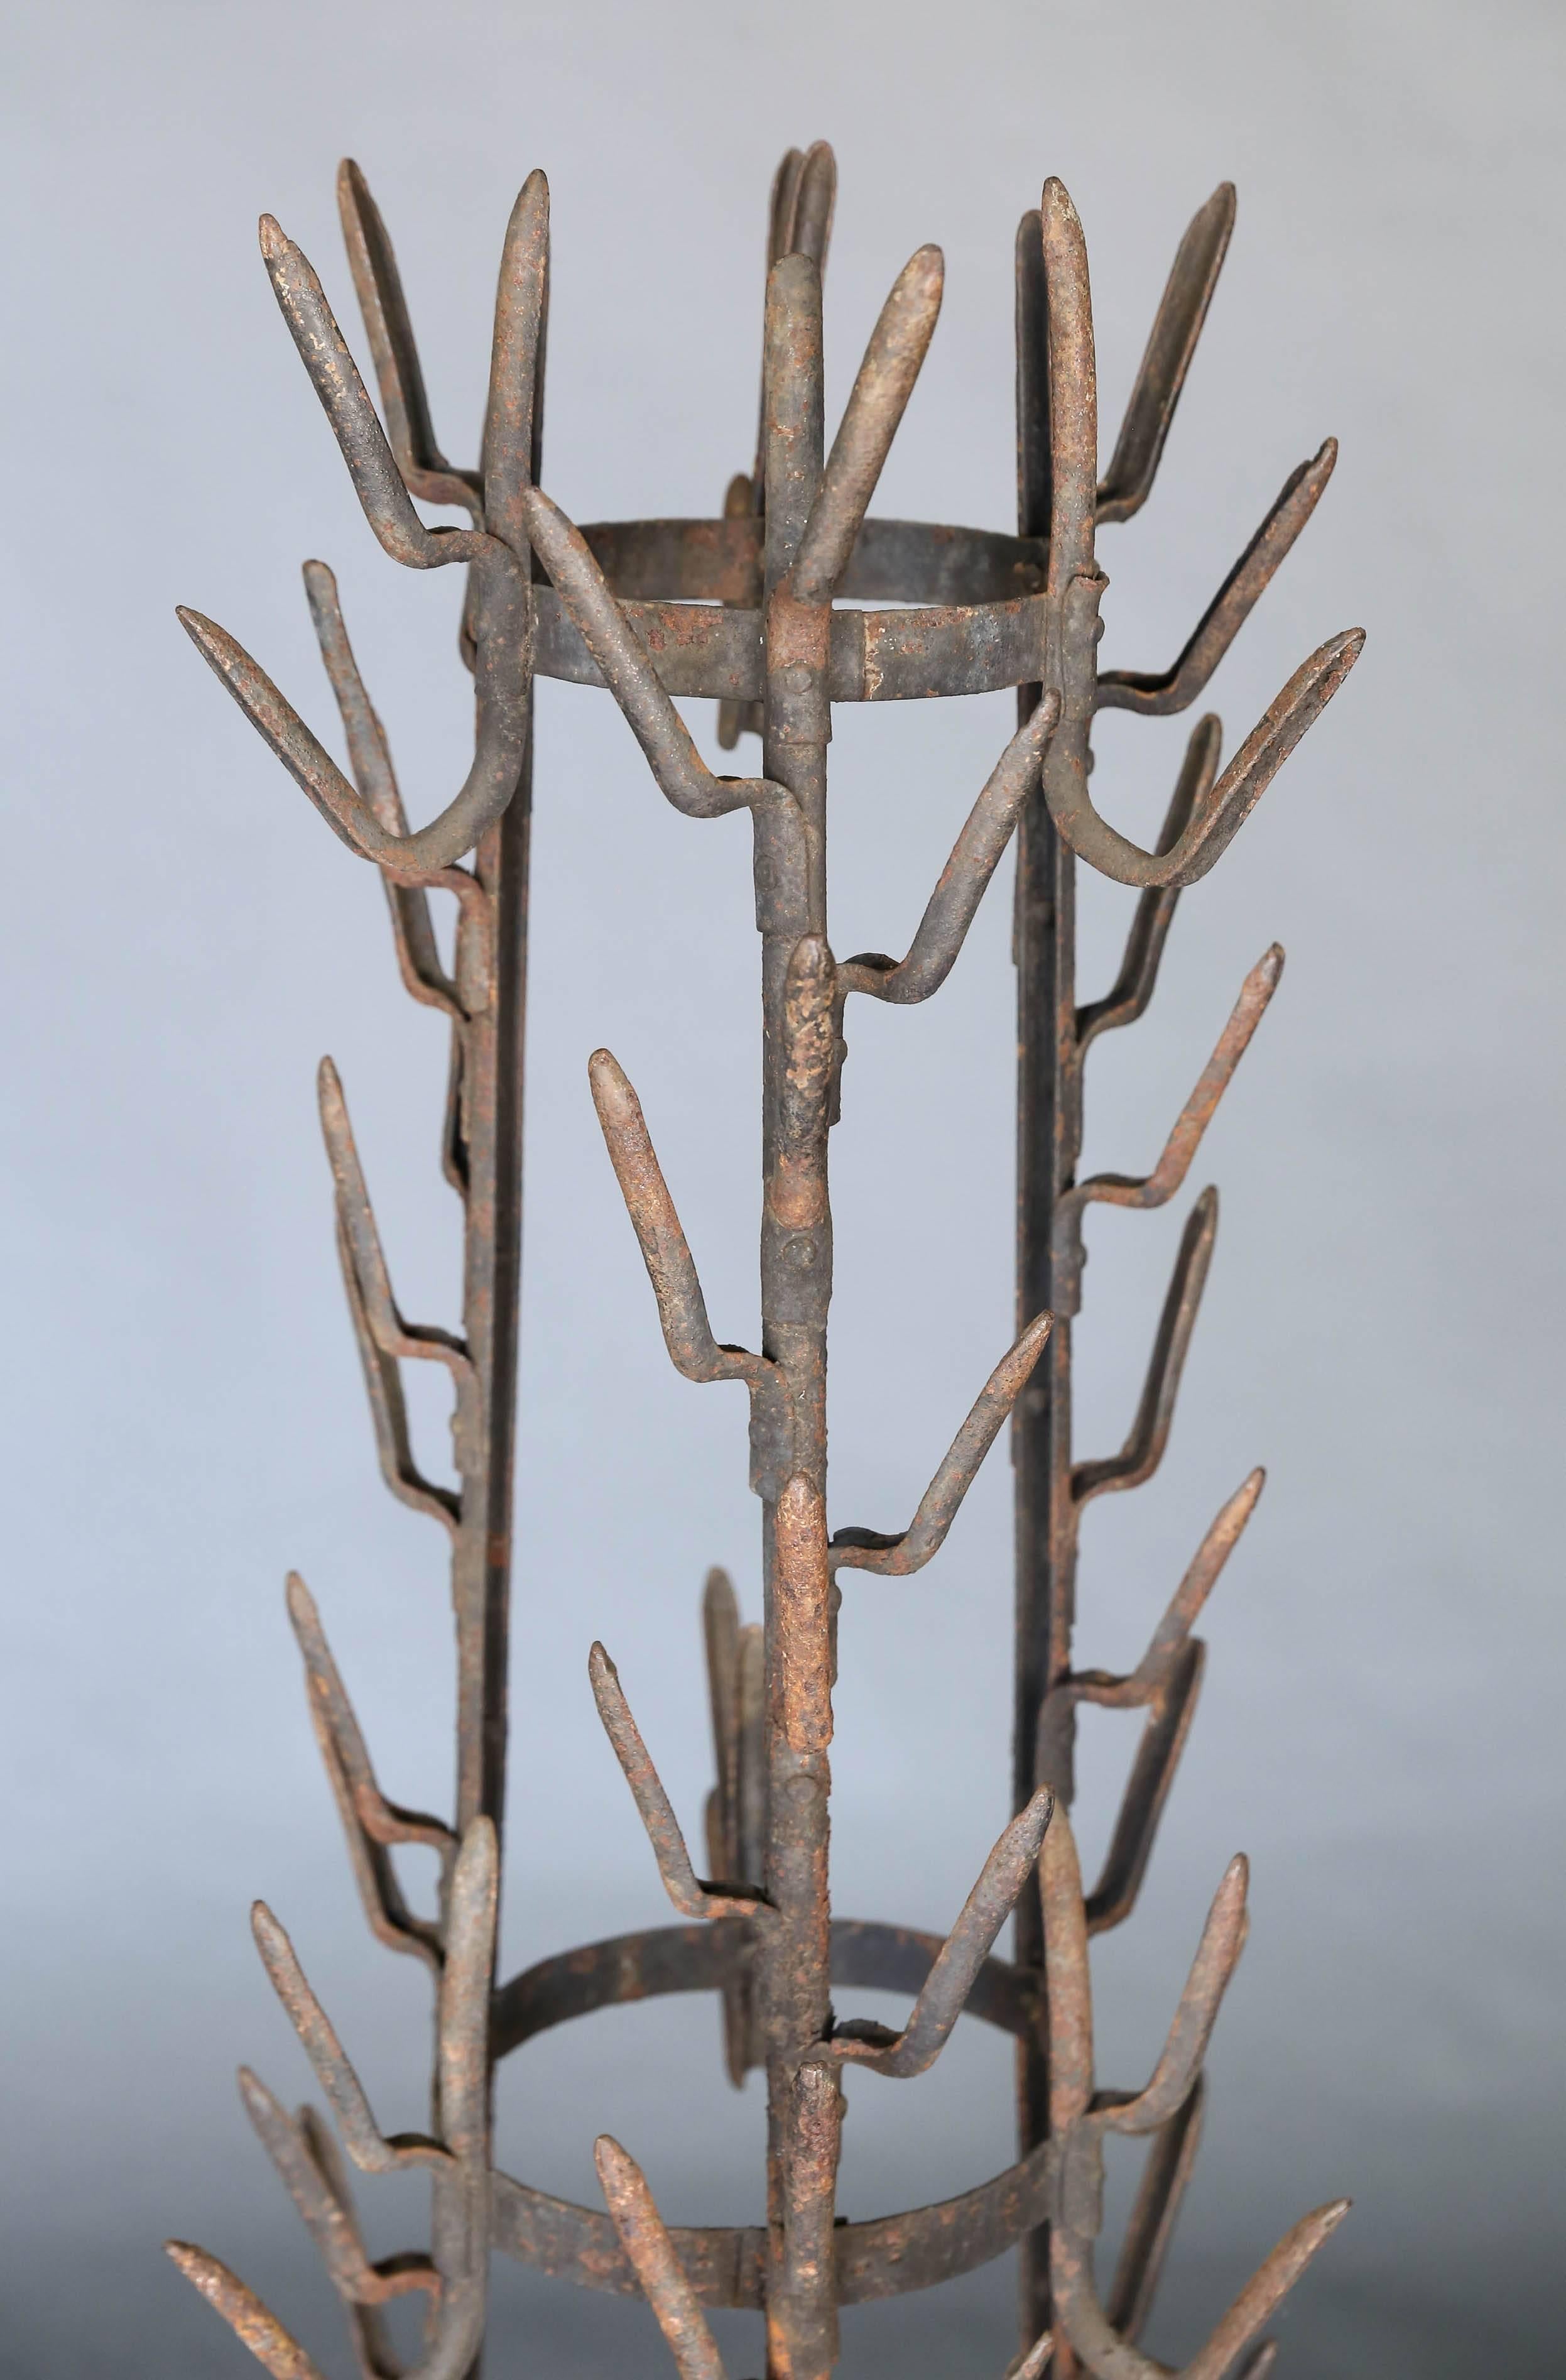 19th century bottle dryer from Arras, France with stylized iron foot in the shape of an animal's paw. This piece is sculpture.